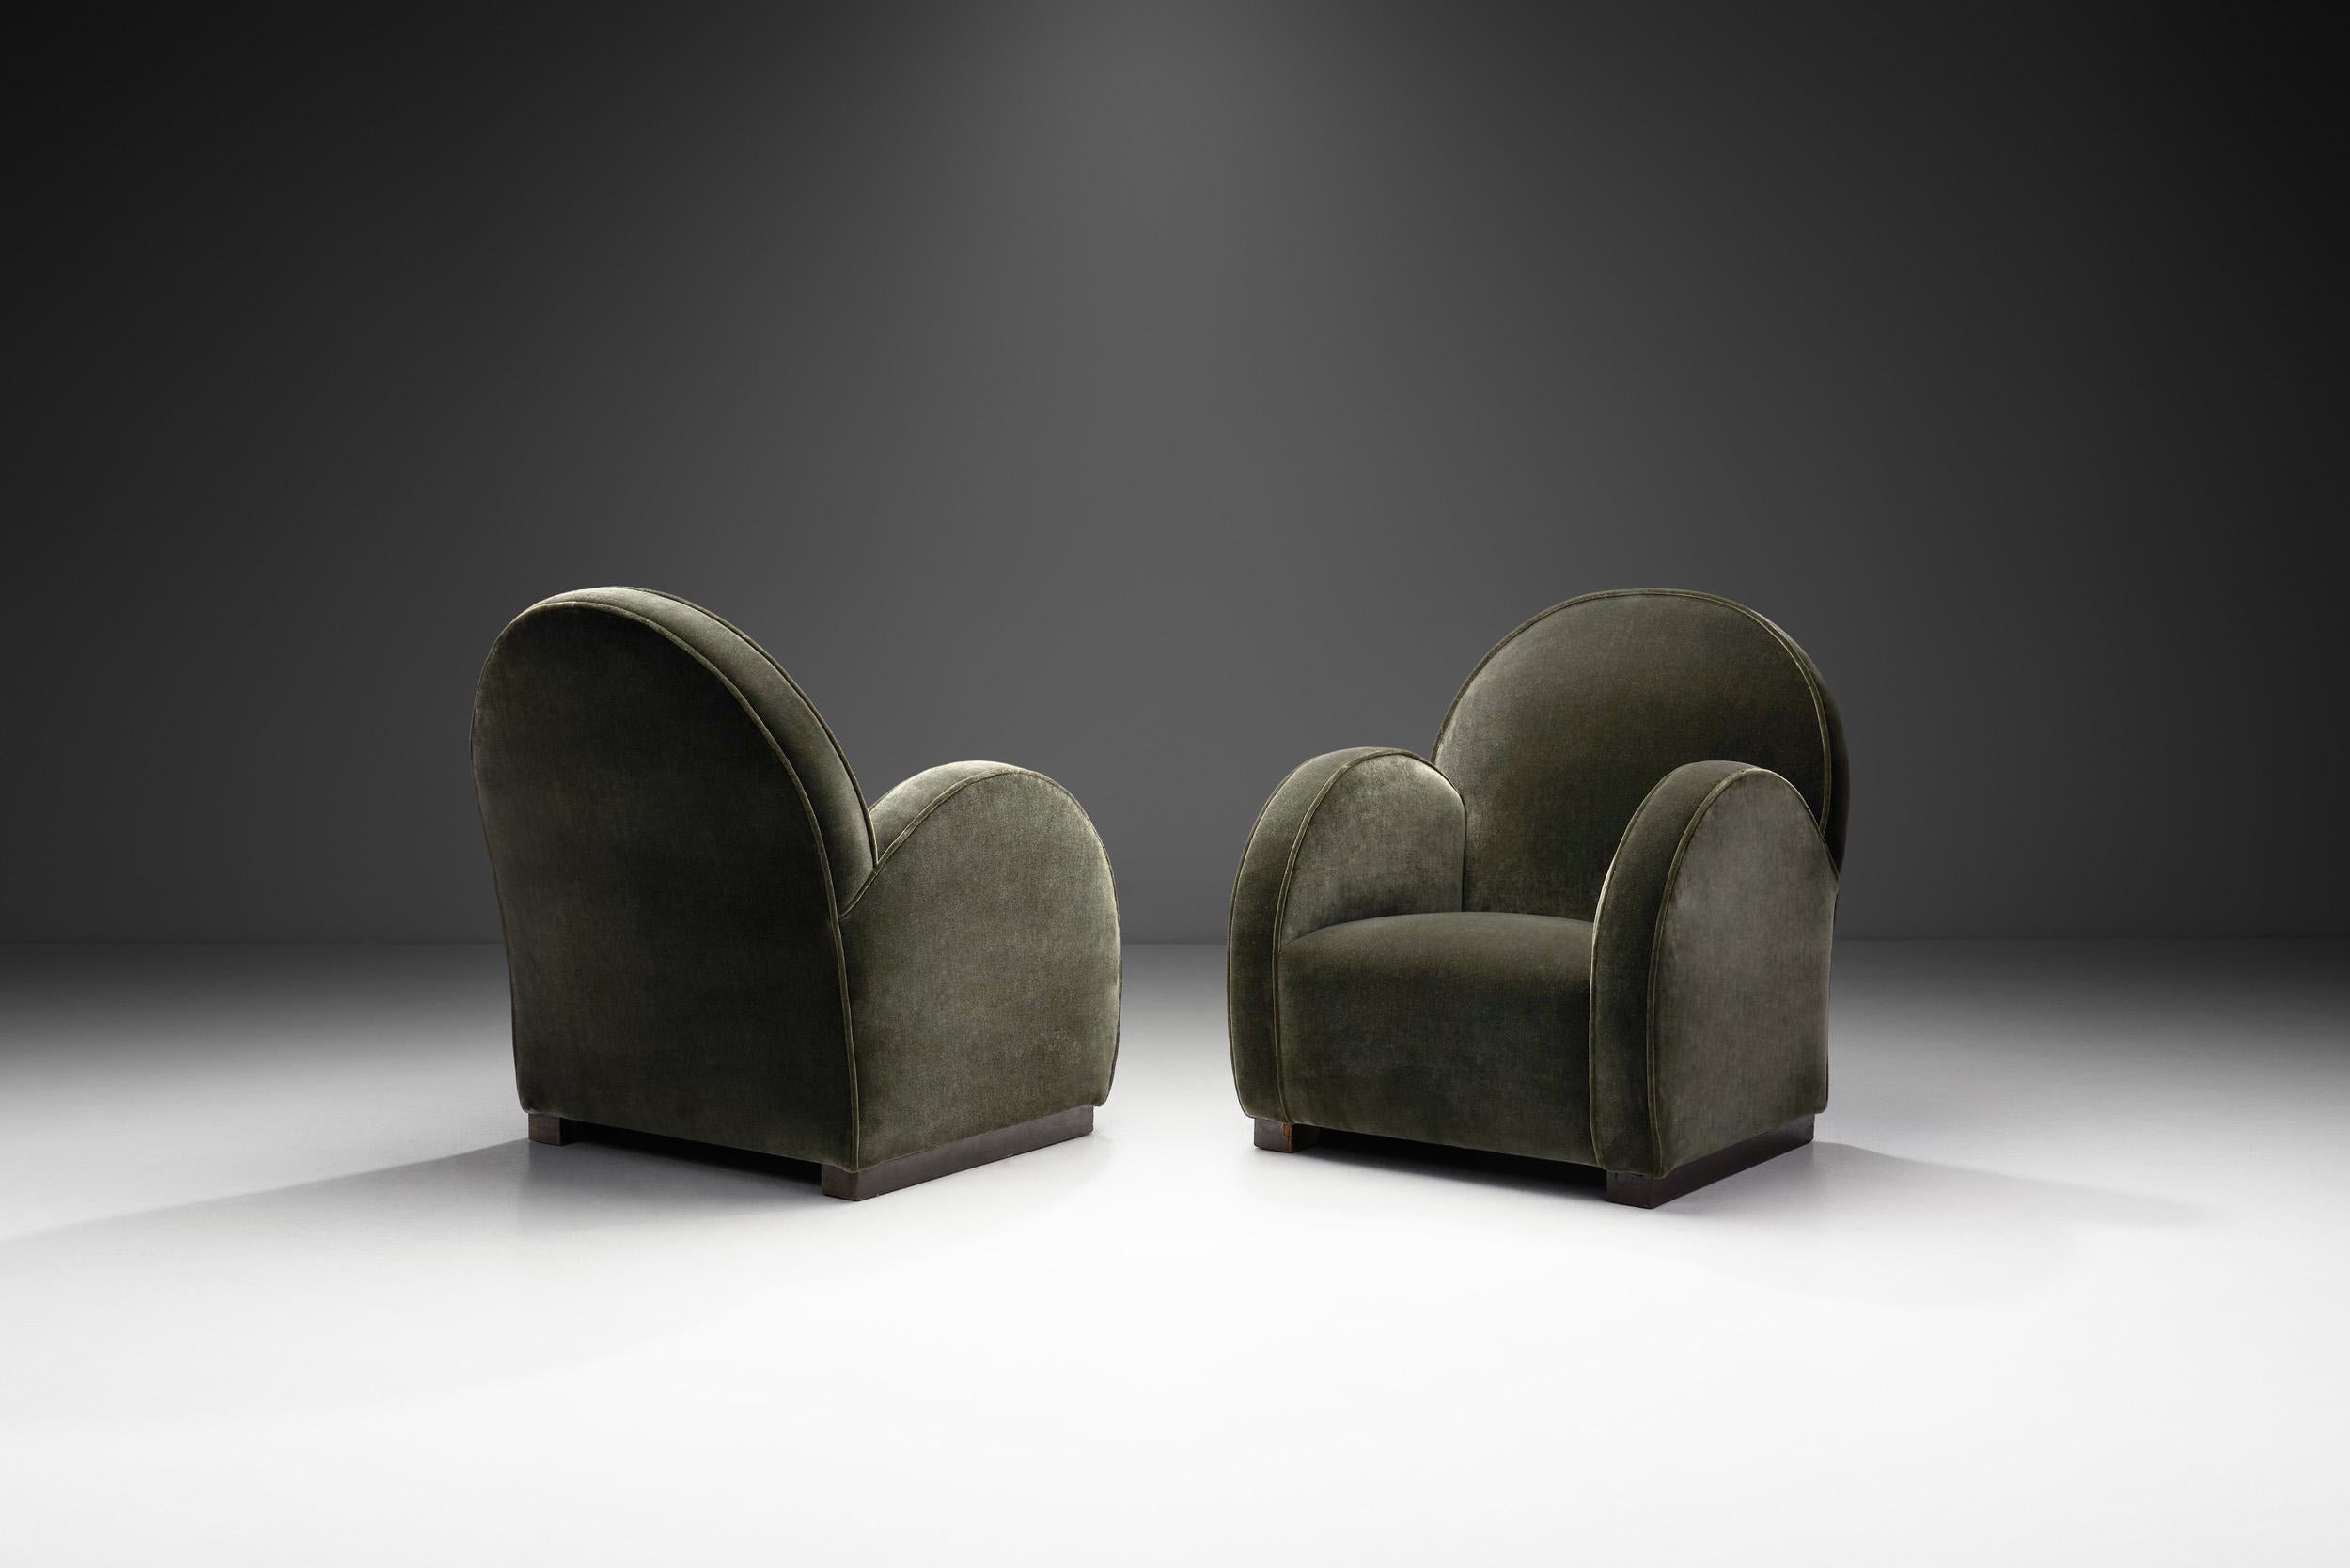 Simplicity, functionality, and elegance - these are the basic aspects of the design of this pair of sophisticated armchairs. The design has a delightful touch of the century’s previous artistic movements merged with the streamlined look of Modernism